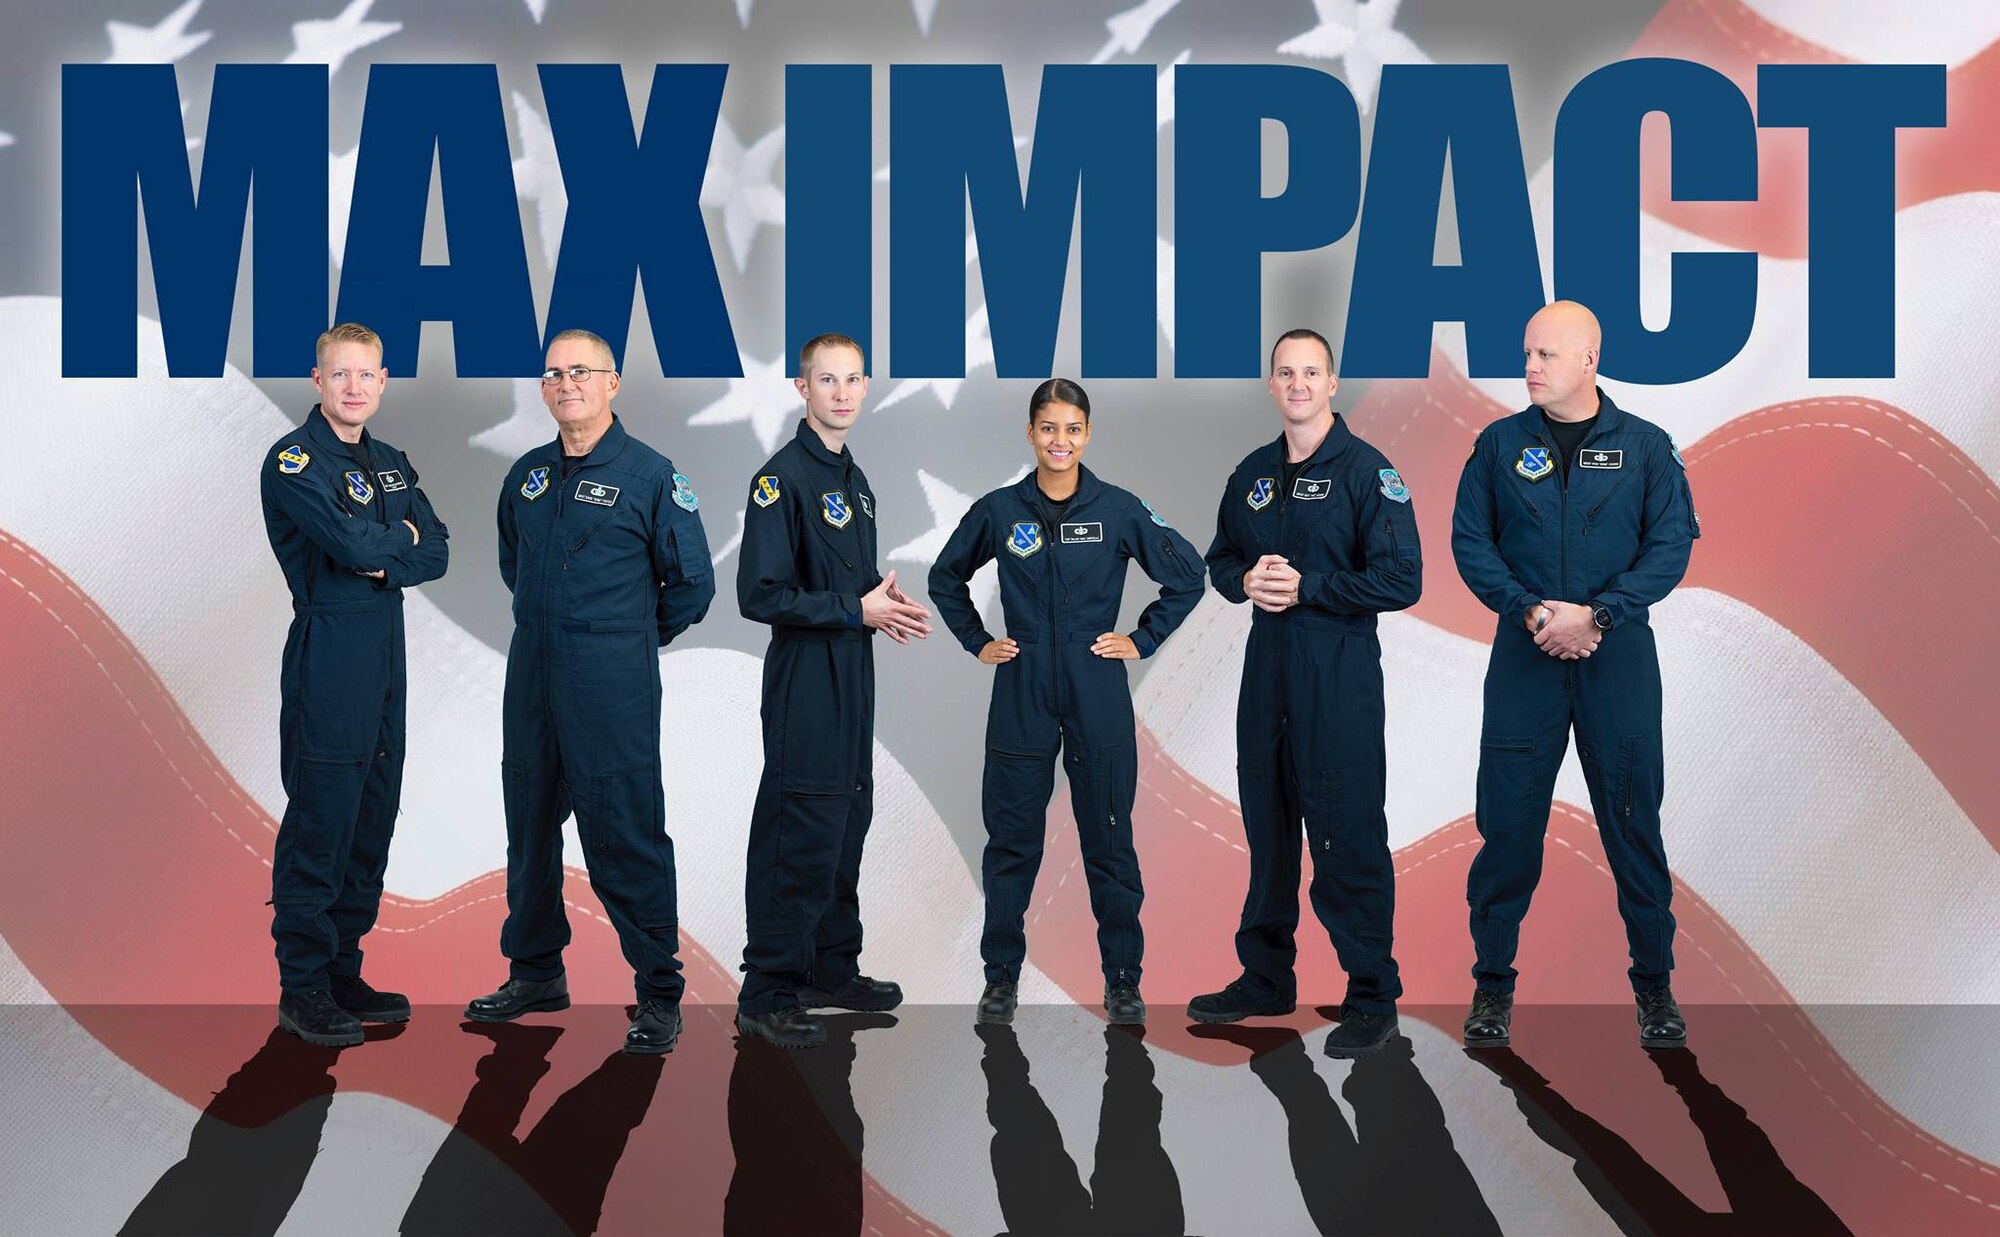 The U.S. Air Force’s Premier Rock Band Max Impact will release their newest original song this Veterans Day. The six-piece ensemble has explored new roots since their latest hard rock single “Find You” and created an organic southern crossover combined with a compelling patriotic message.